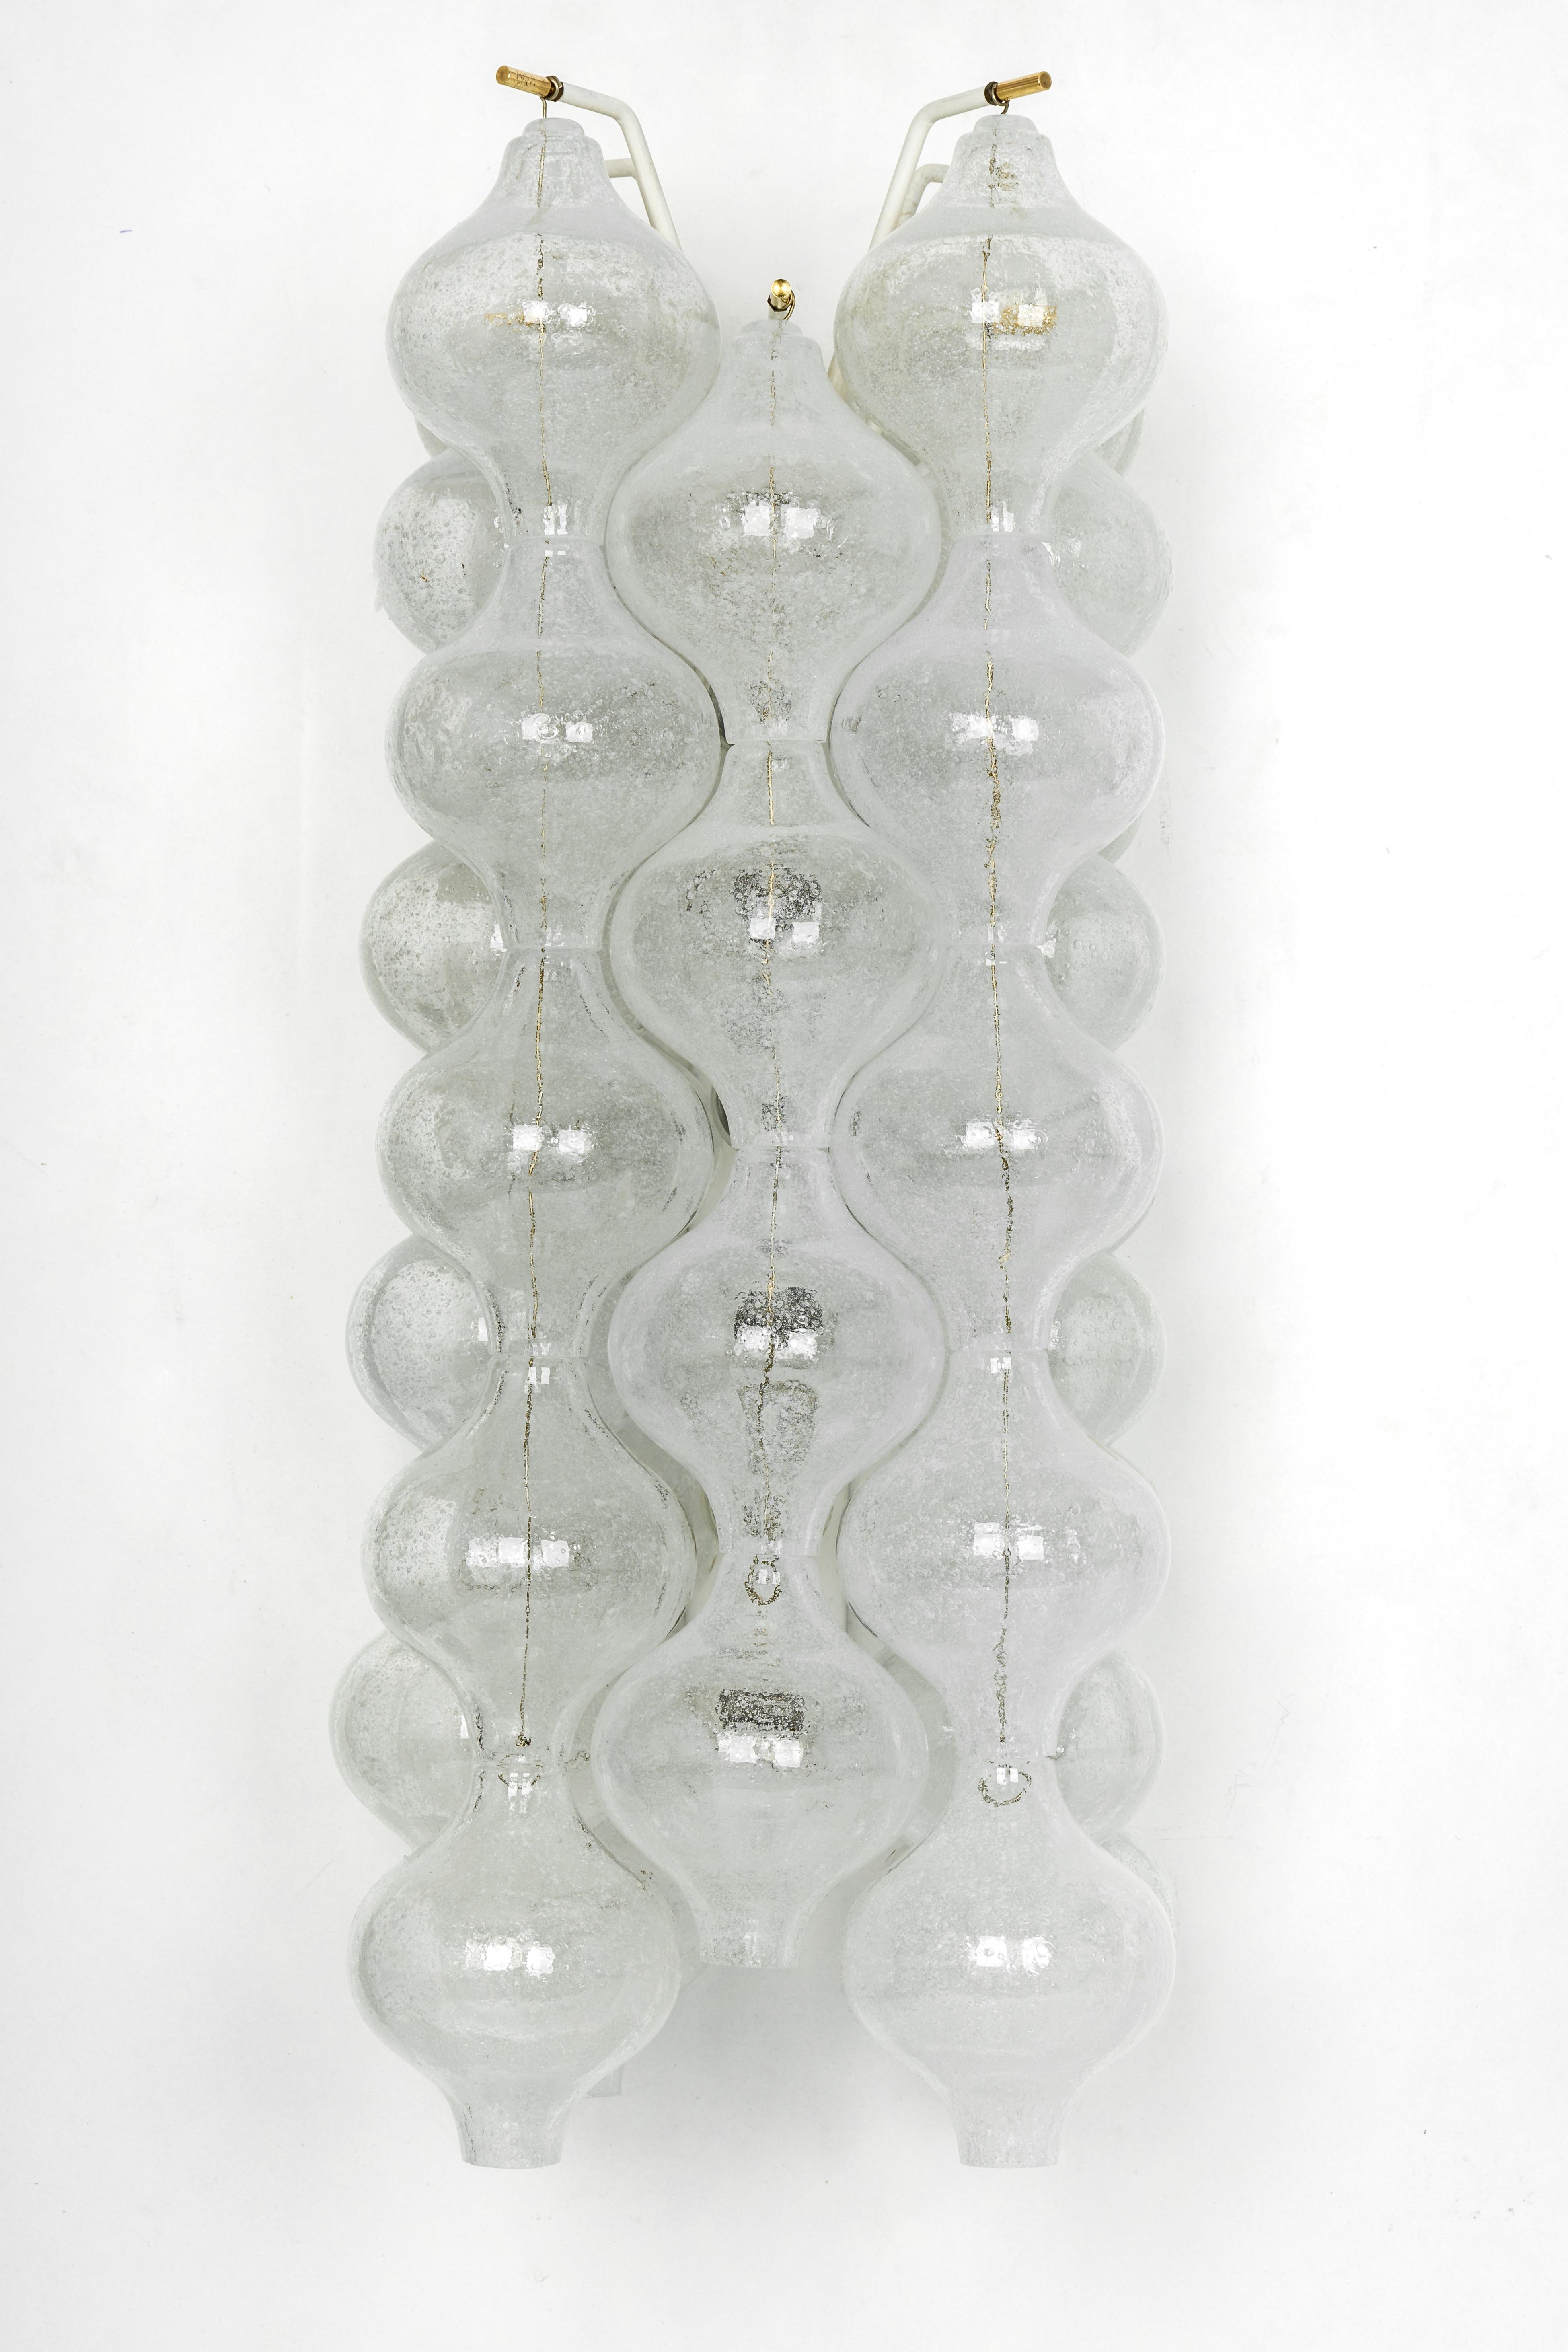 Wonderful midcentury wall sconce, made by Kalmar, Austria, manufactured, circa 1970-1979.
Each tulip-shaped glass is handmade, which makes each glass piece a unique piece. The sconce is made of 32 glass pieces on a white enameled metal frame.

Heavy